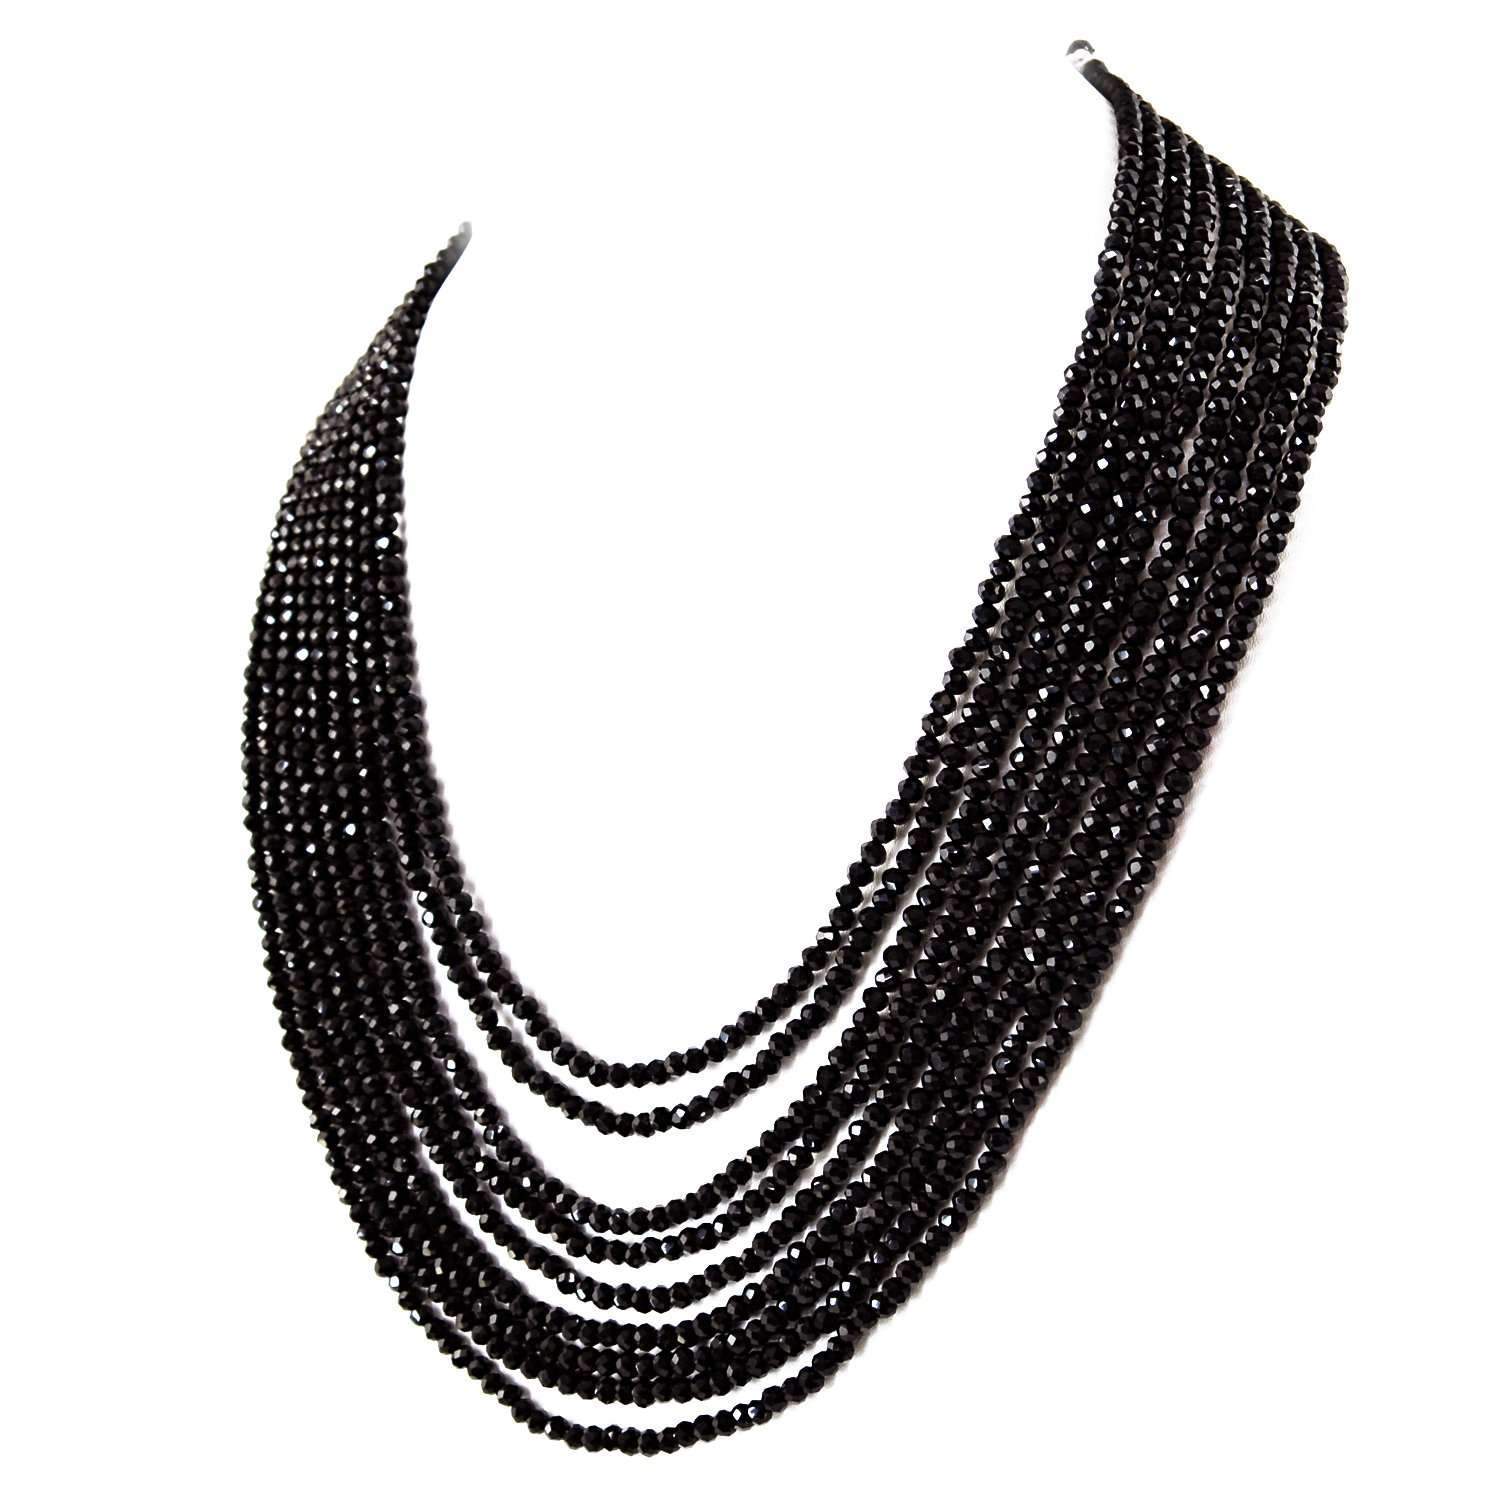 gemsmore:Natural Black Spinel Necklace 9 Strand Untreated Round Cut Beads